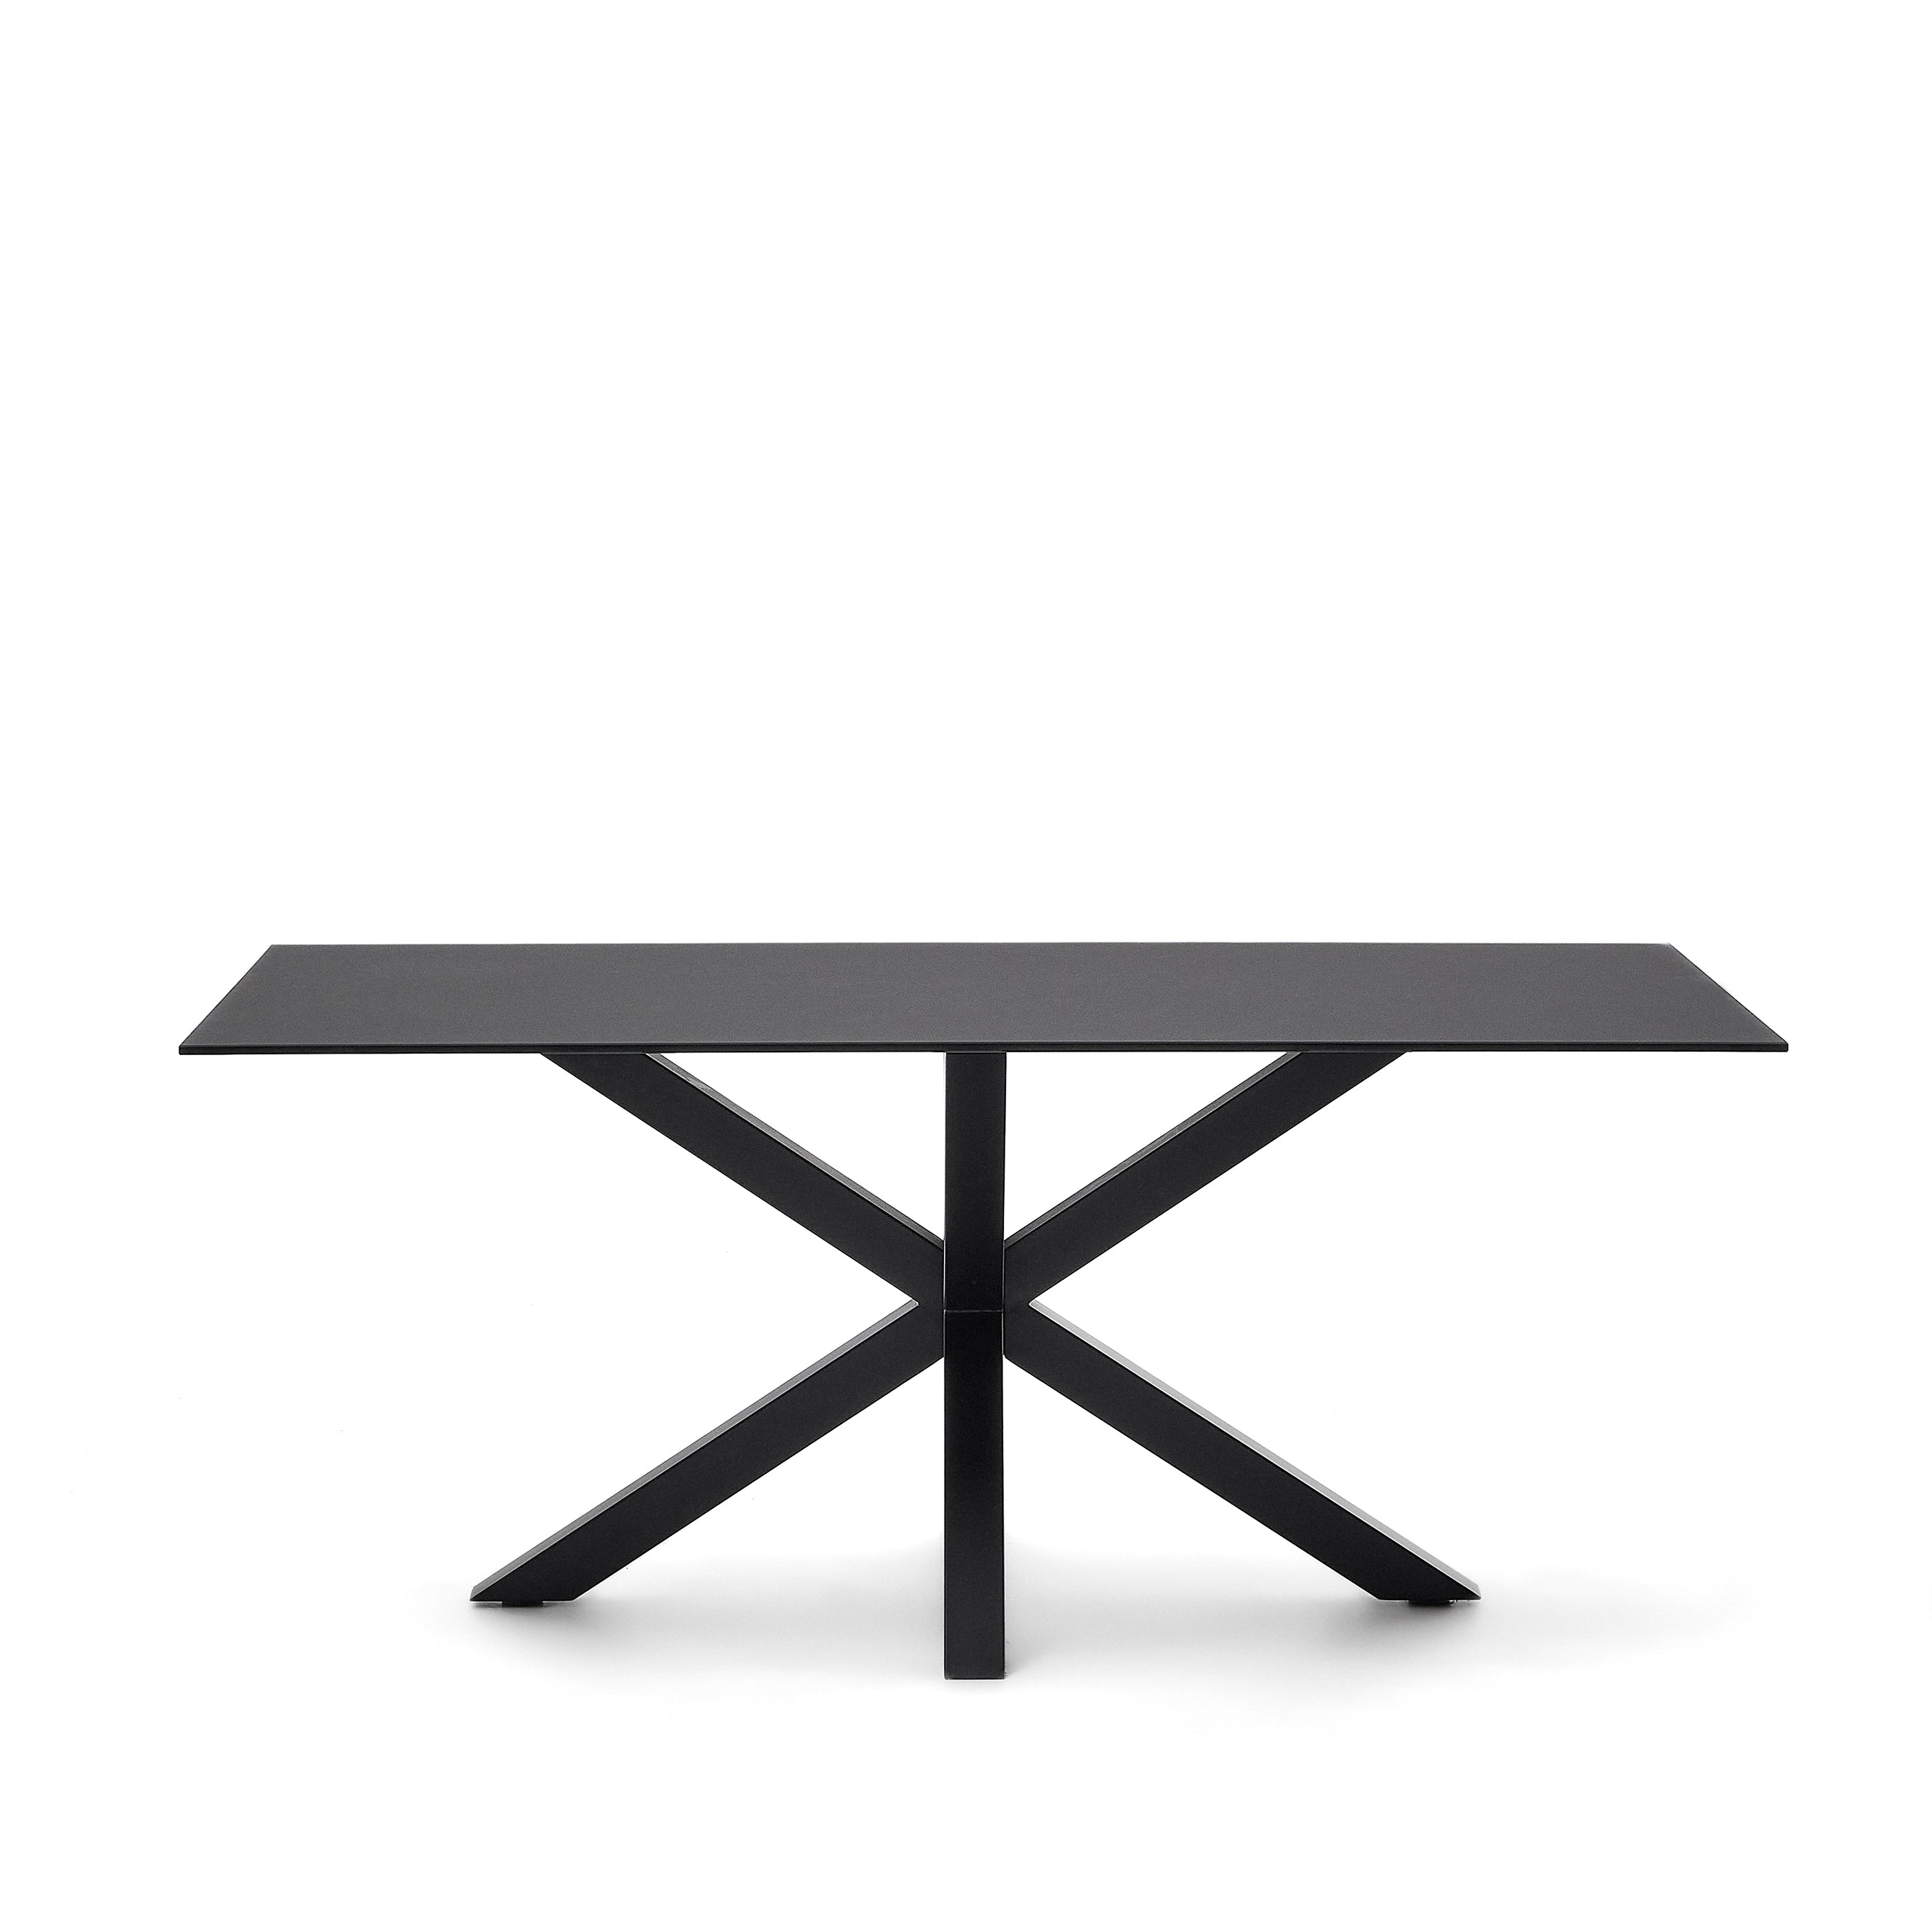 Argo table with black glass and black steel legs 180 x 190 cm